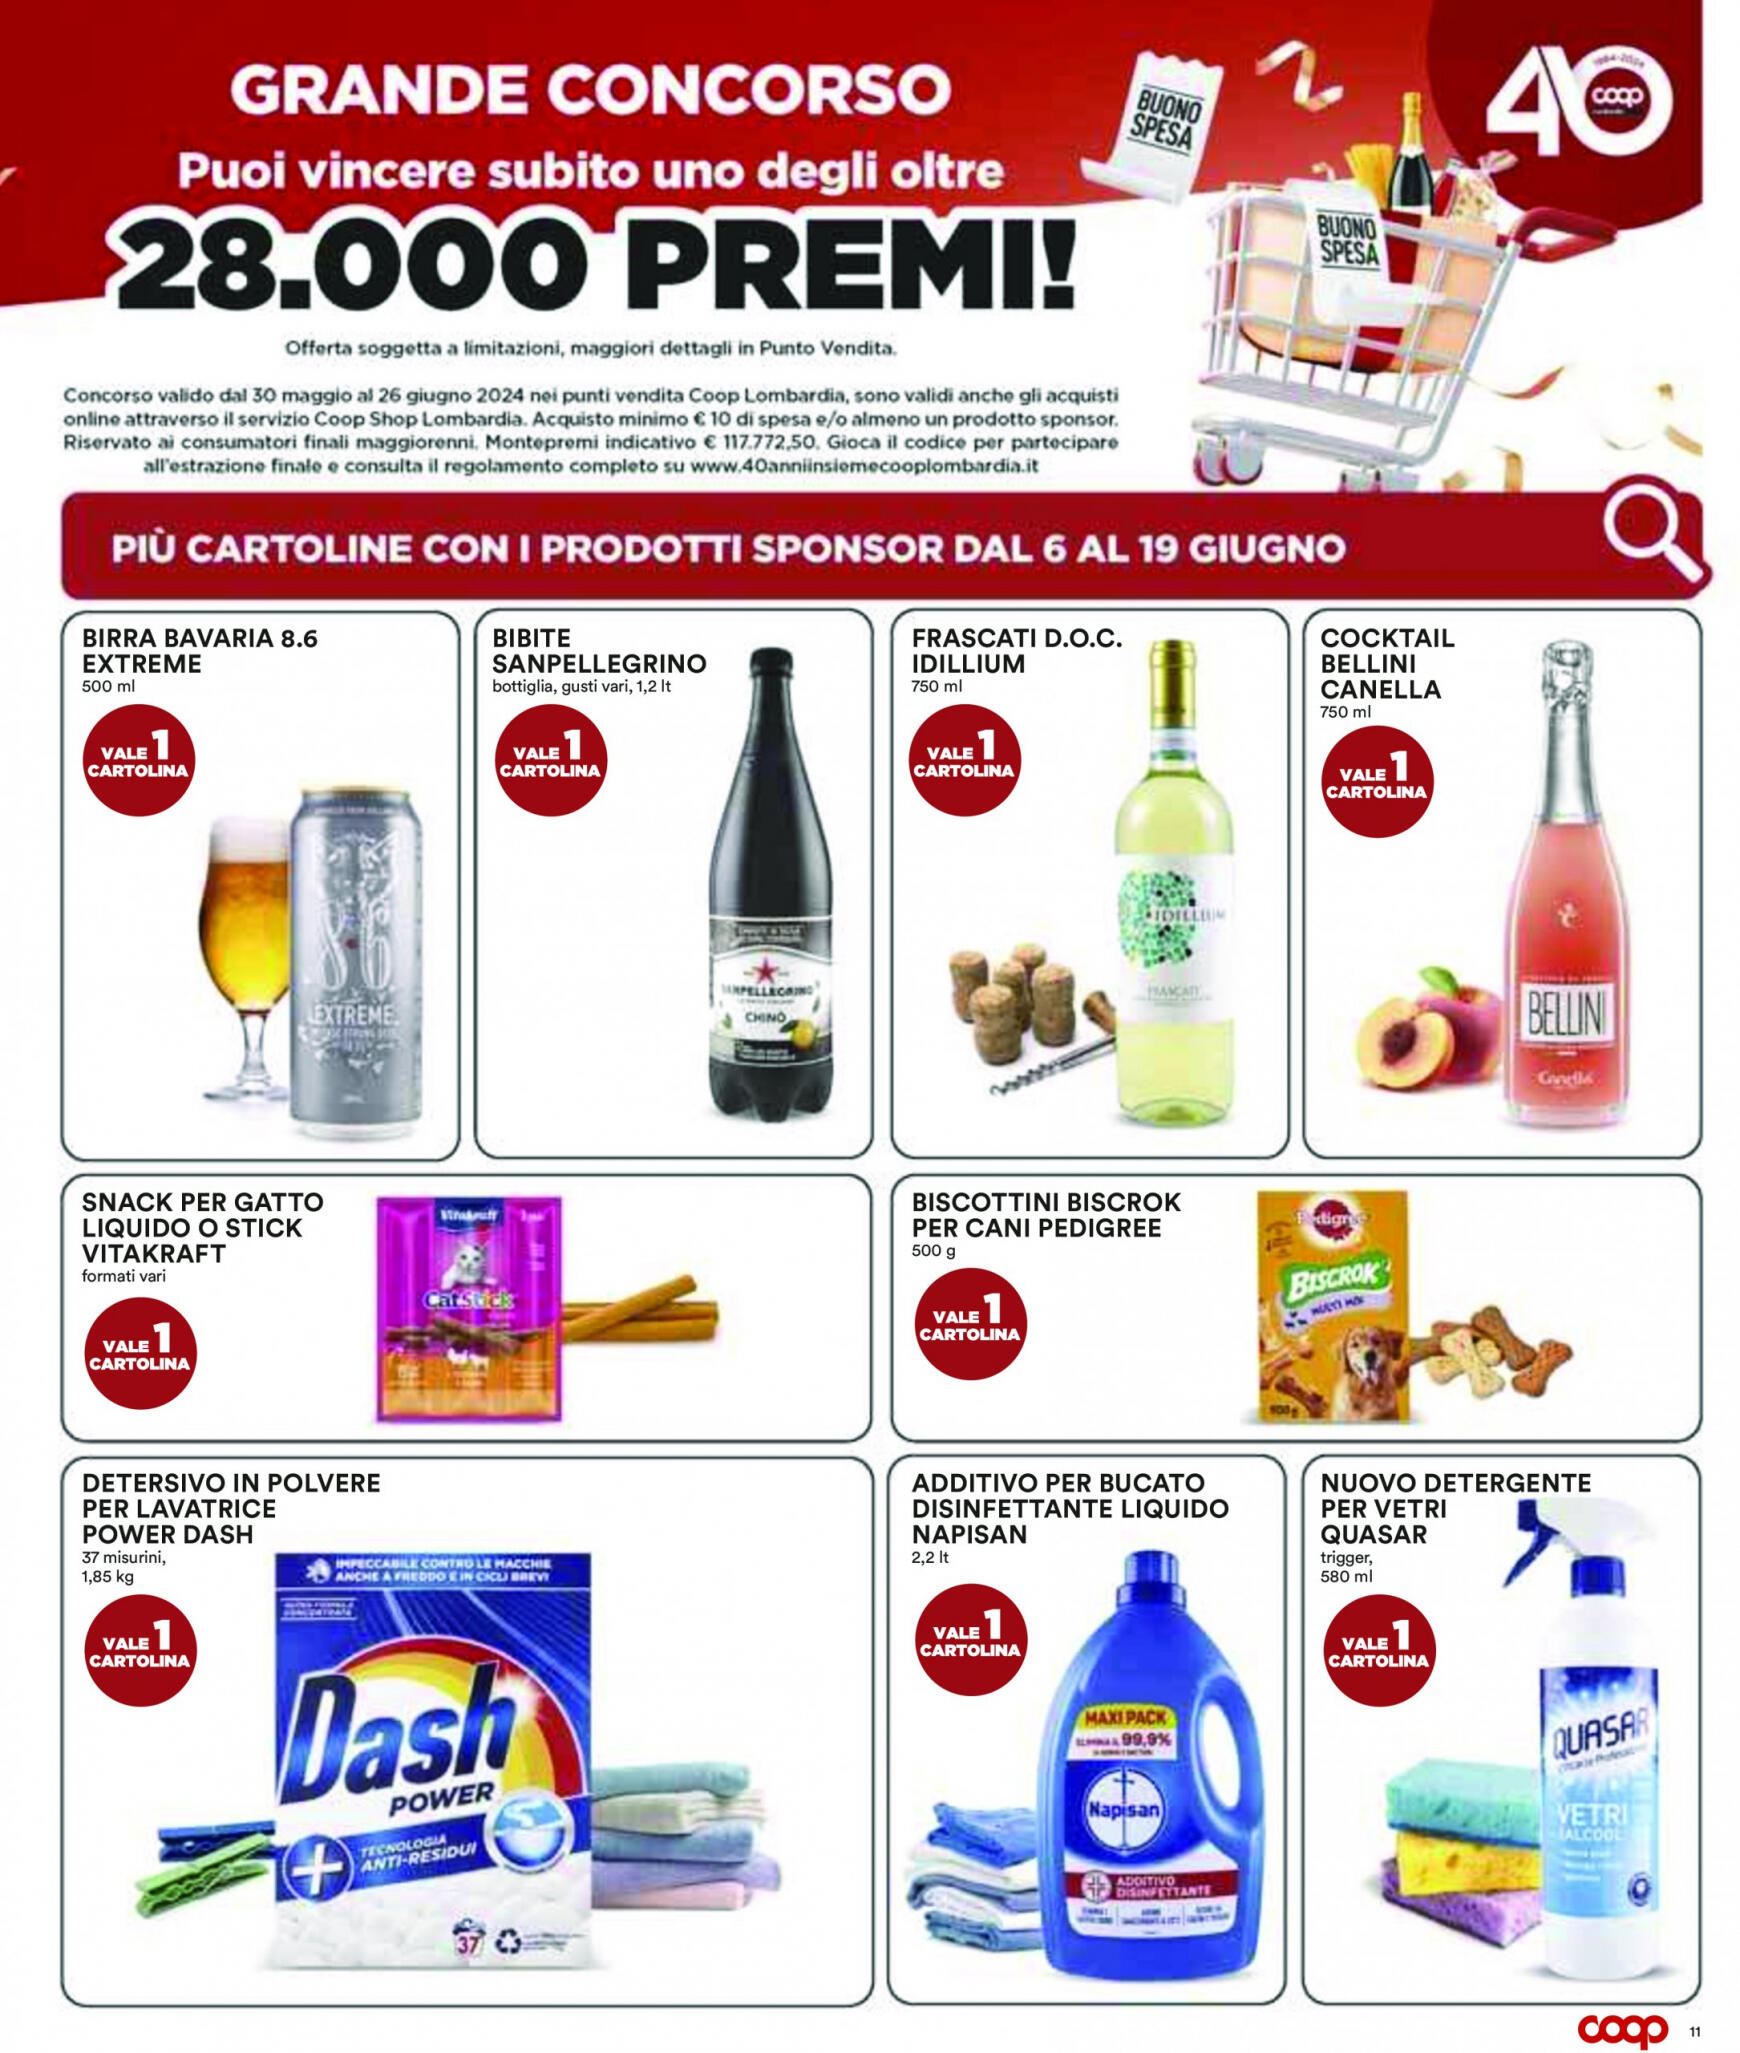 coop - Nuovo volantino Coop 10.06. - 19.06. - page: 11